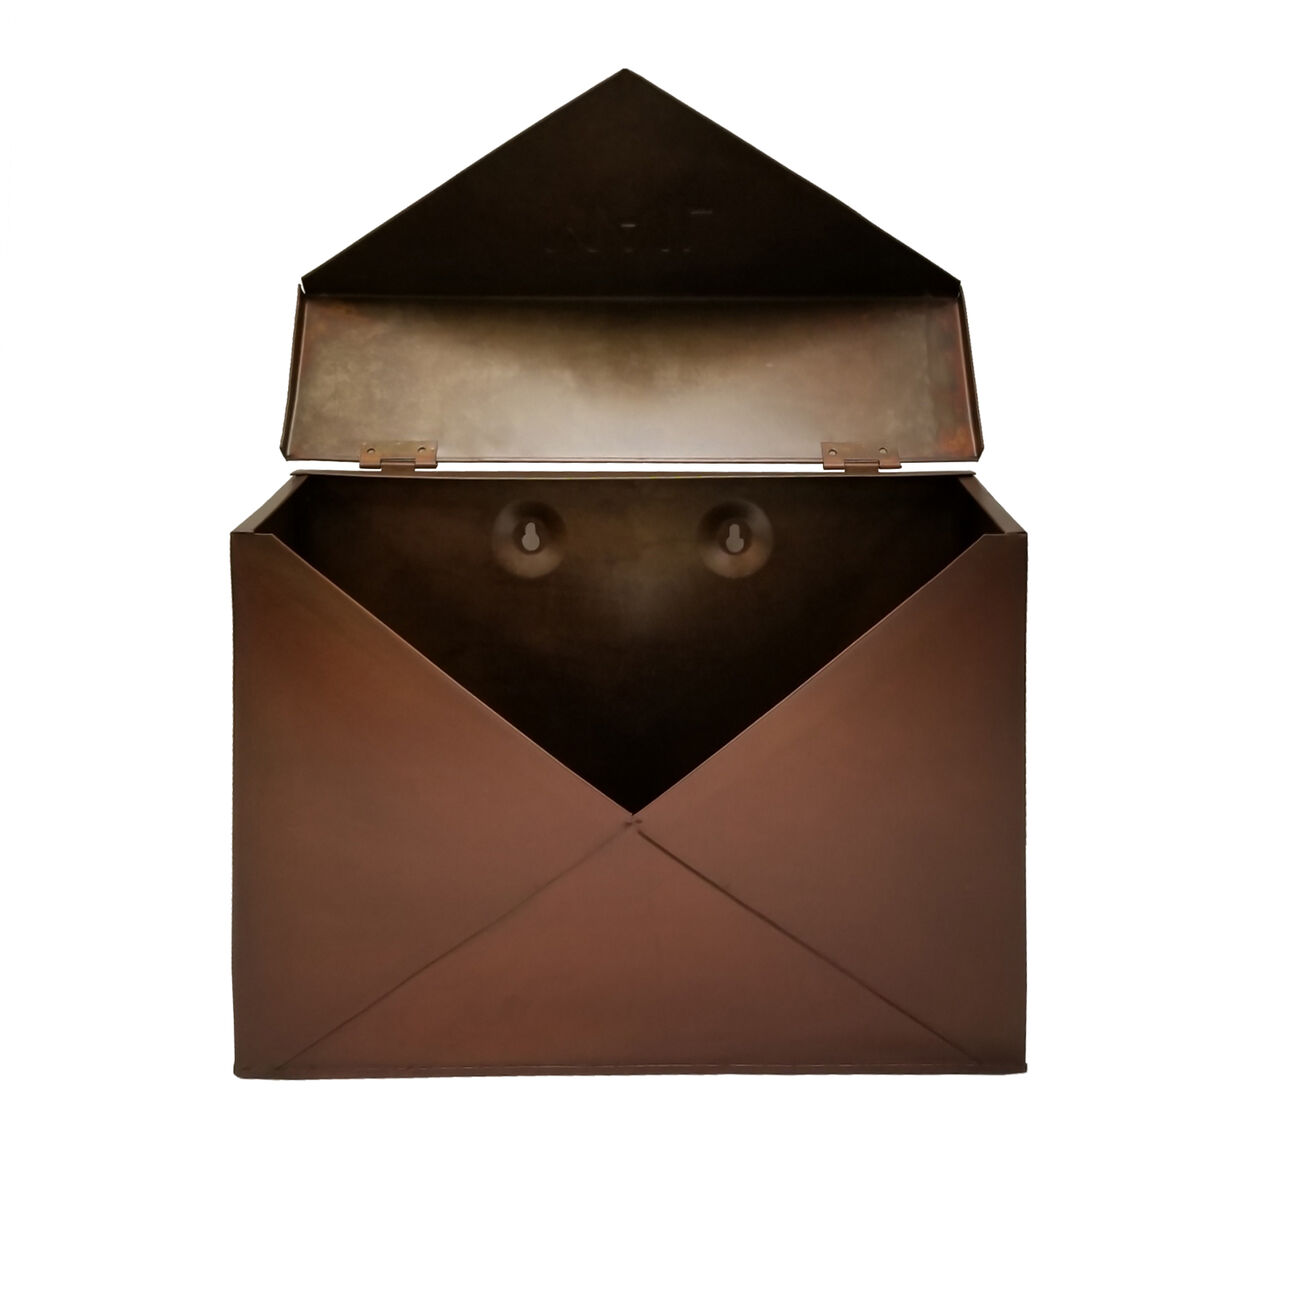 Spacious Envelope Shaped Wall Mount Iron Mail Box, Copper Finish